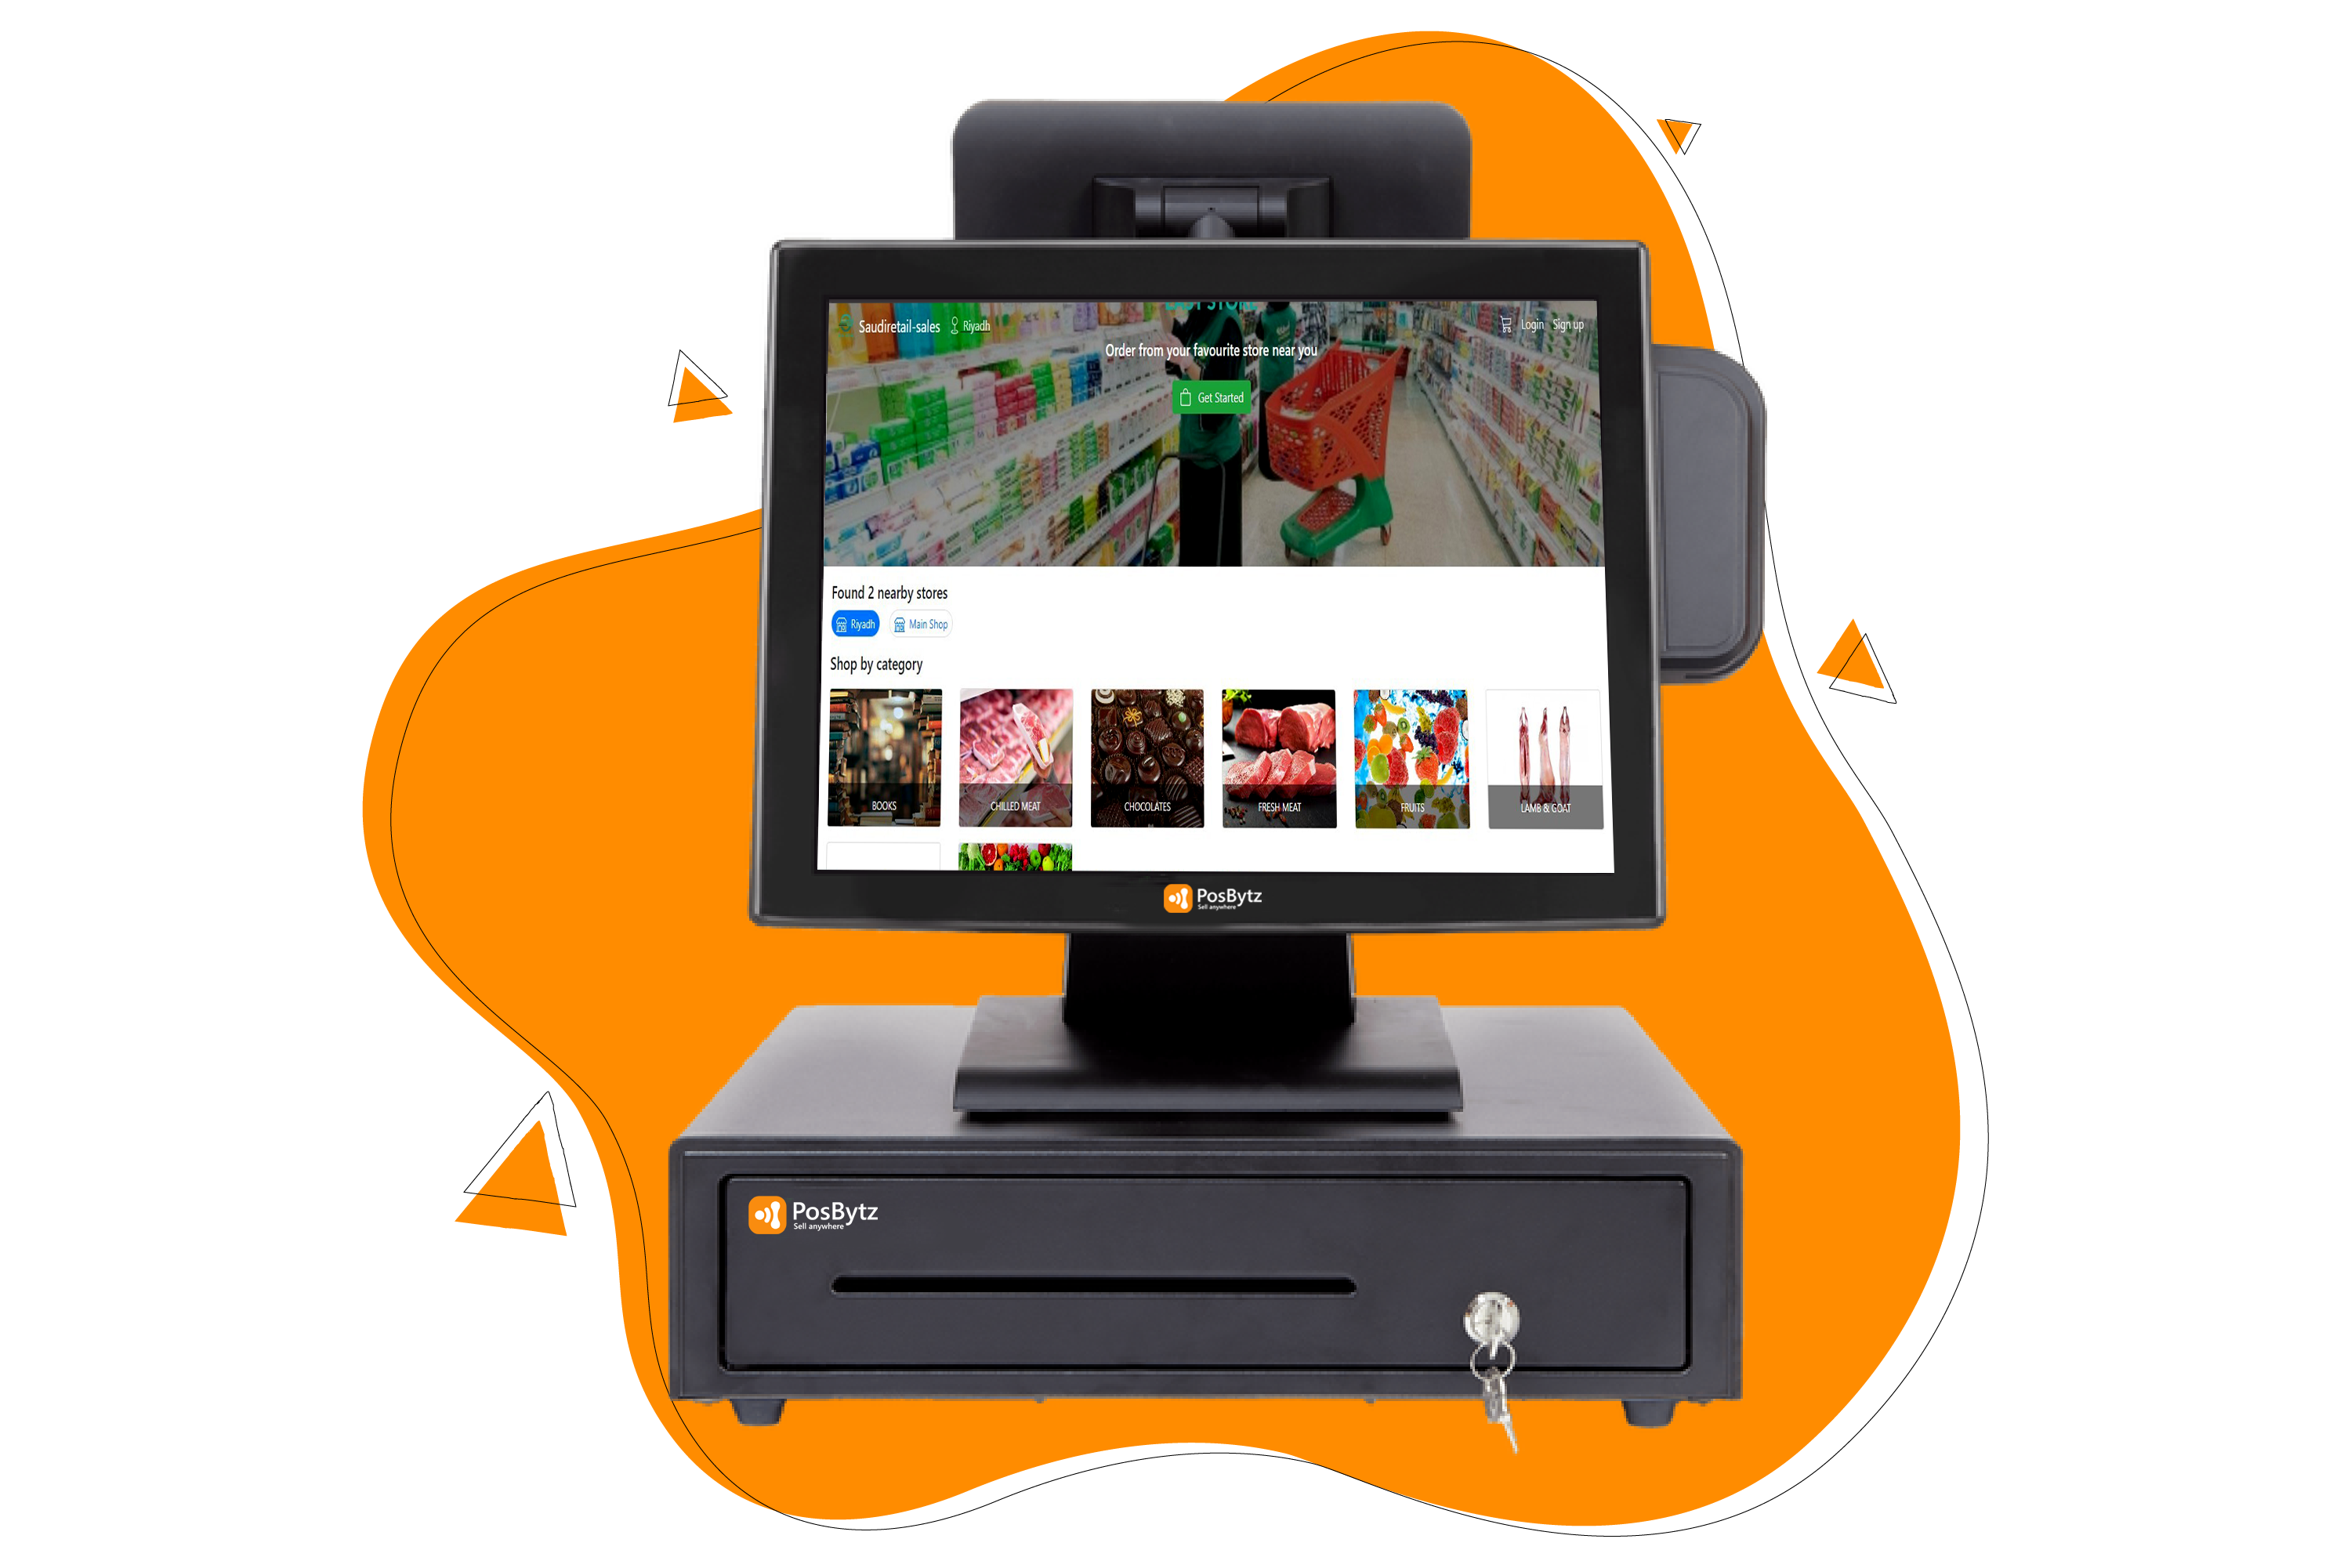 Multi store POS software